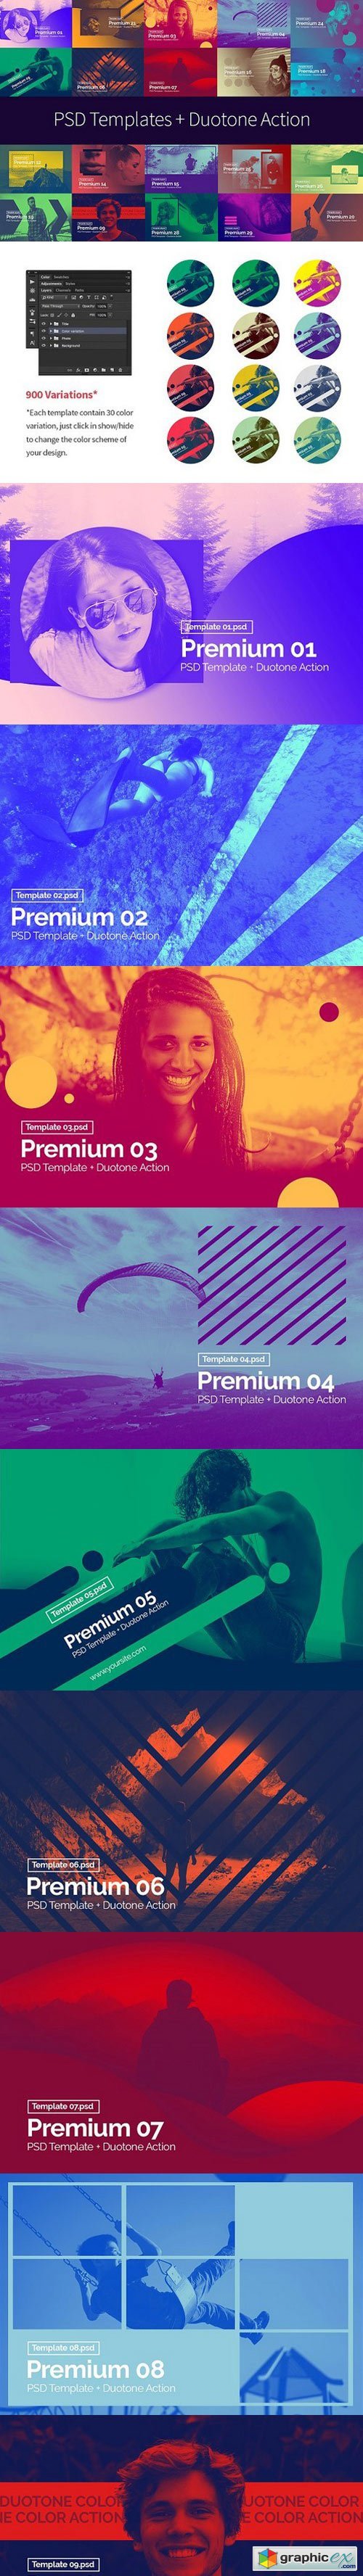 PSD Template + Duotone Action